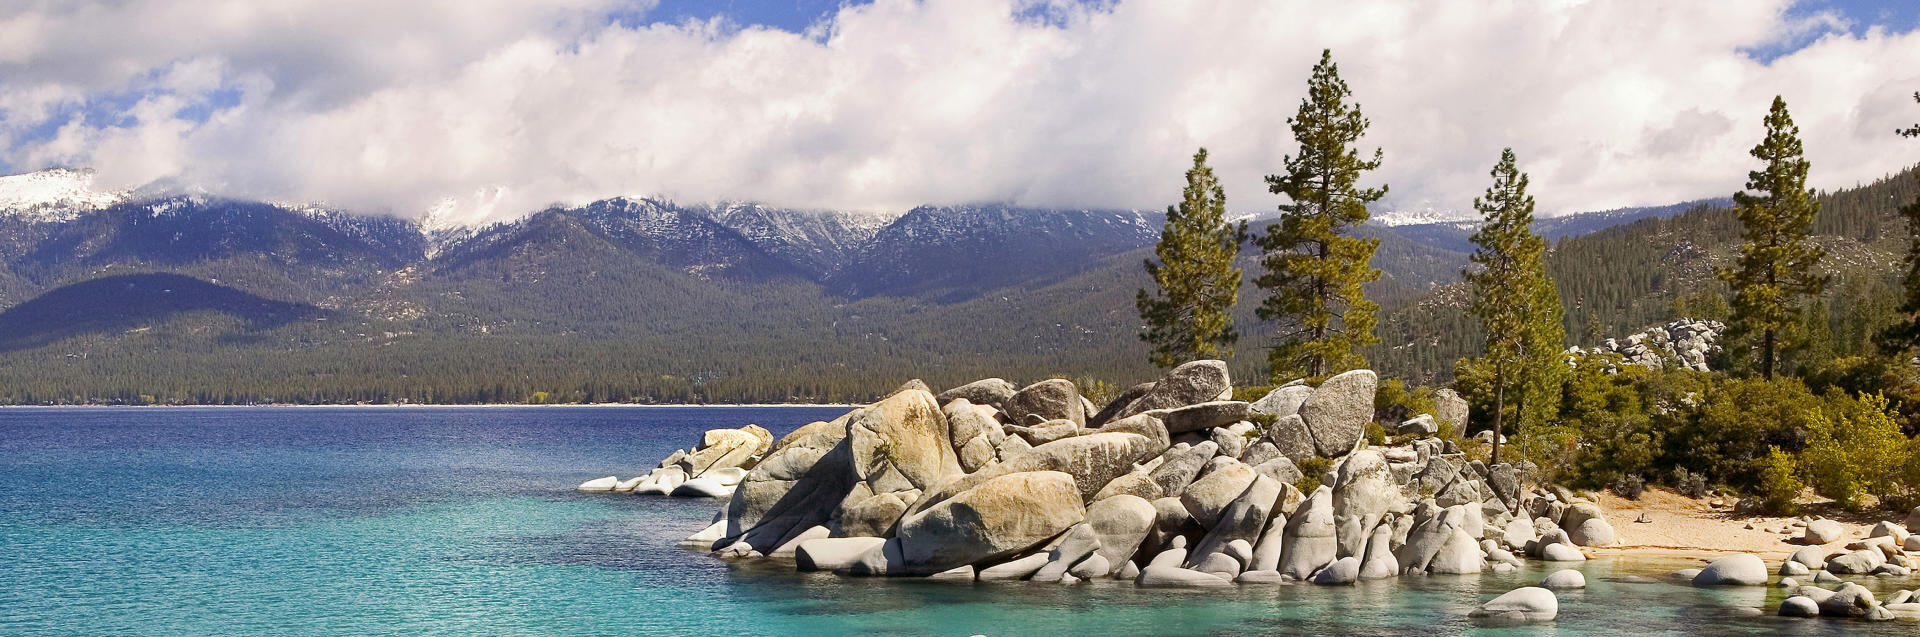 Crystal clear lake in the mountains of Lake Tahoe